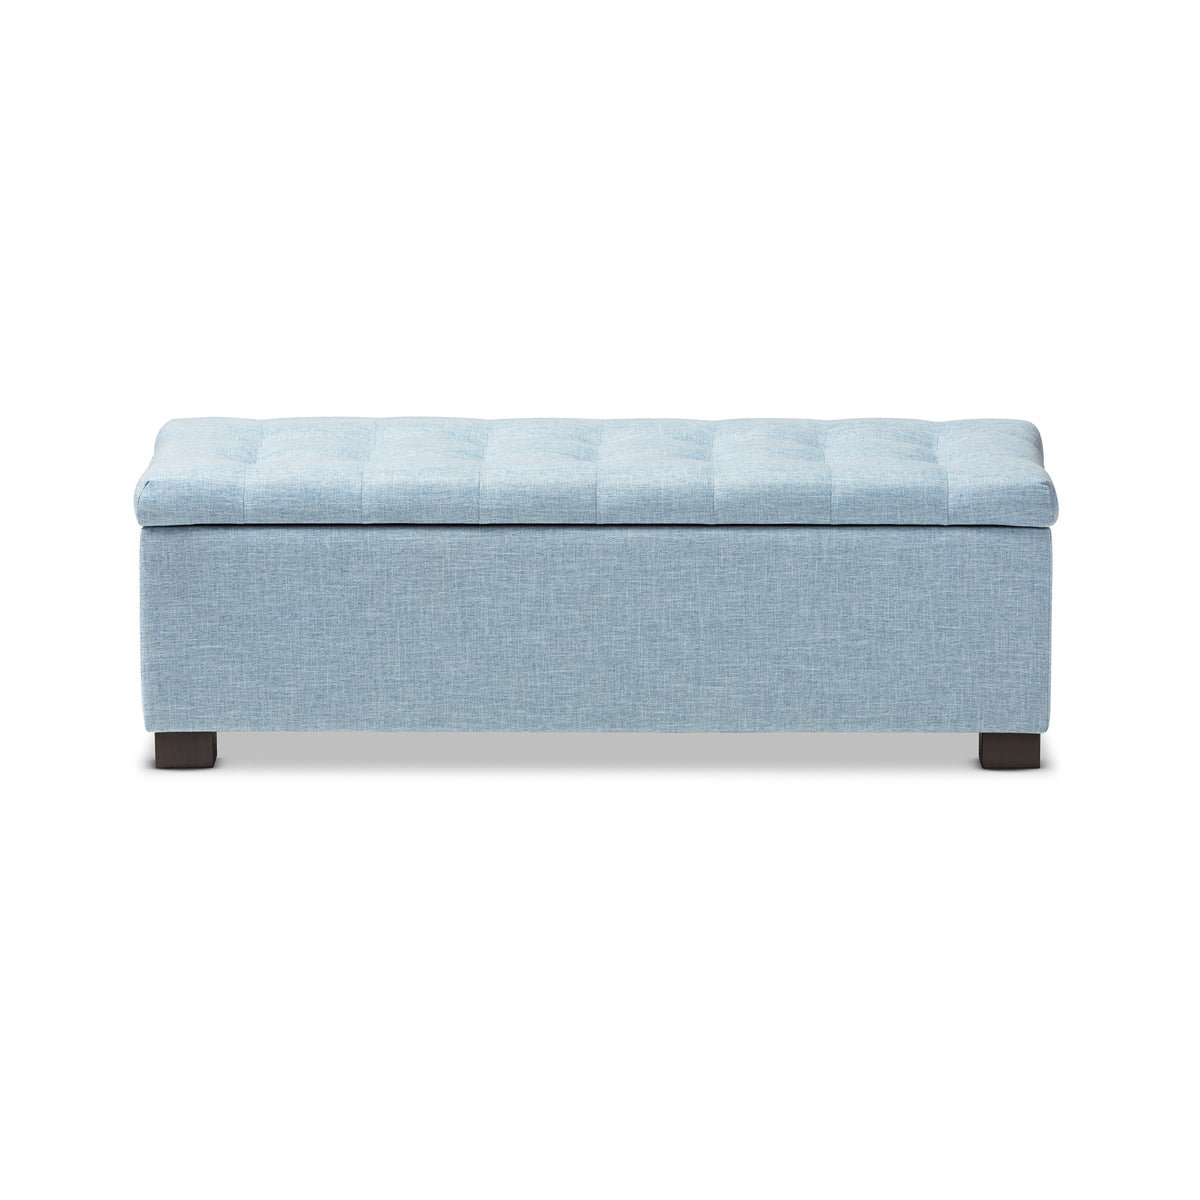 Baxton Studio Roanoke Modern and Contemporary Light Blue Fabric Upholstered Grid-Tufting Storage Ottoman Bench Baxton Studio-benches-Minimal And Modern - 4